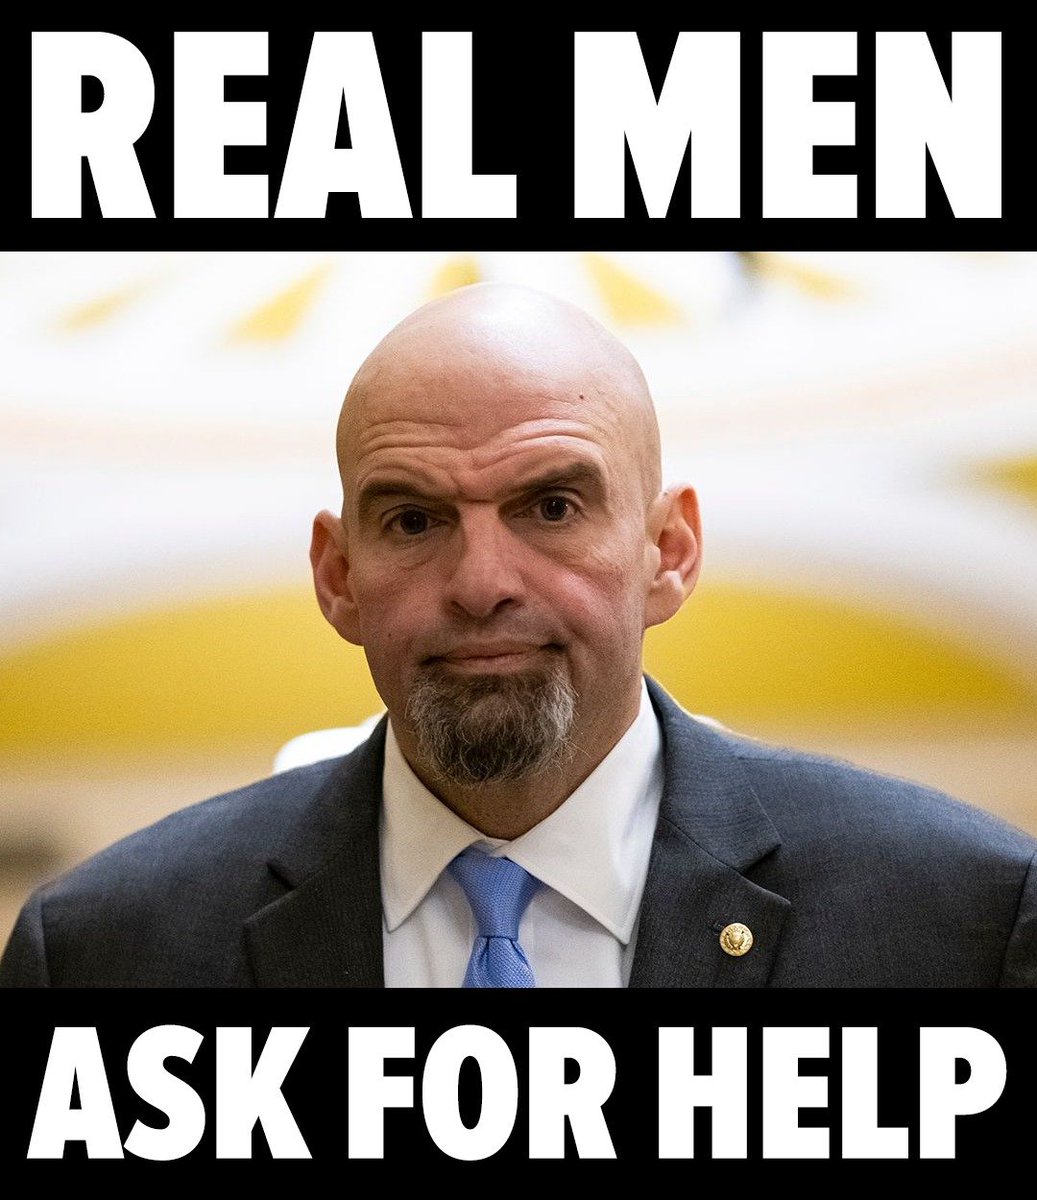 Yes they do. What he is going through is NORMAL for having a stroke. You have to recreate your self. The strong ask for help. Mr. Fetterman is a real man. I applaud him especially for his terrific work for this country. Thank you.